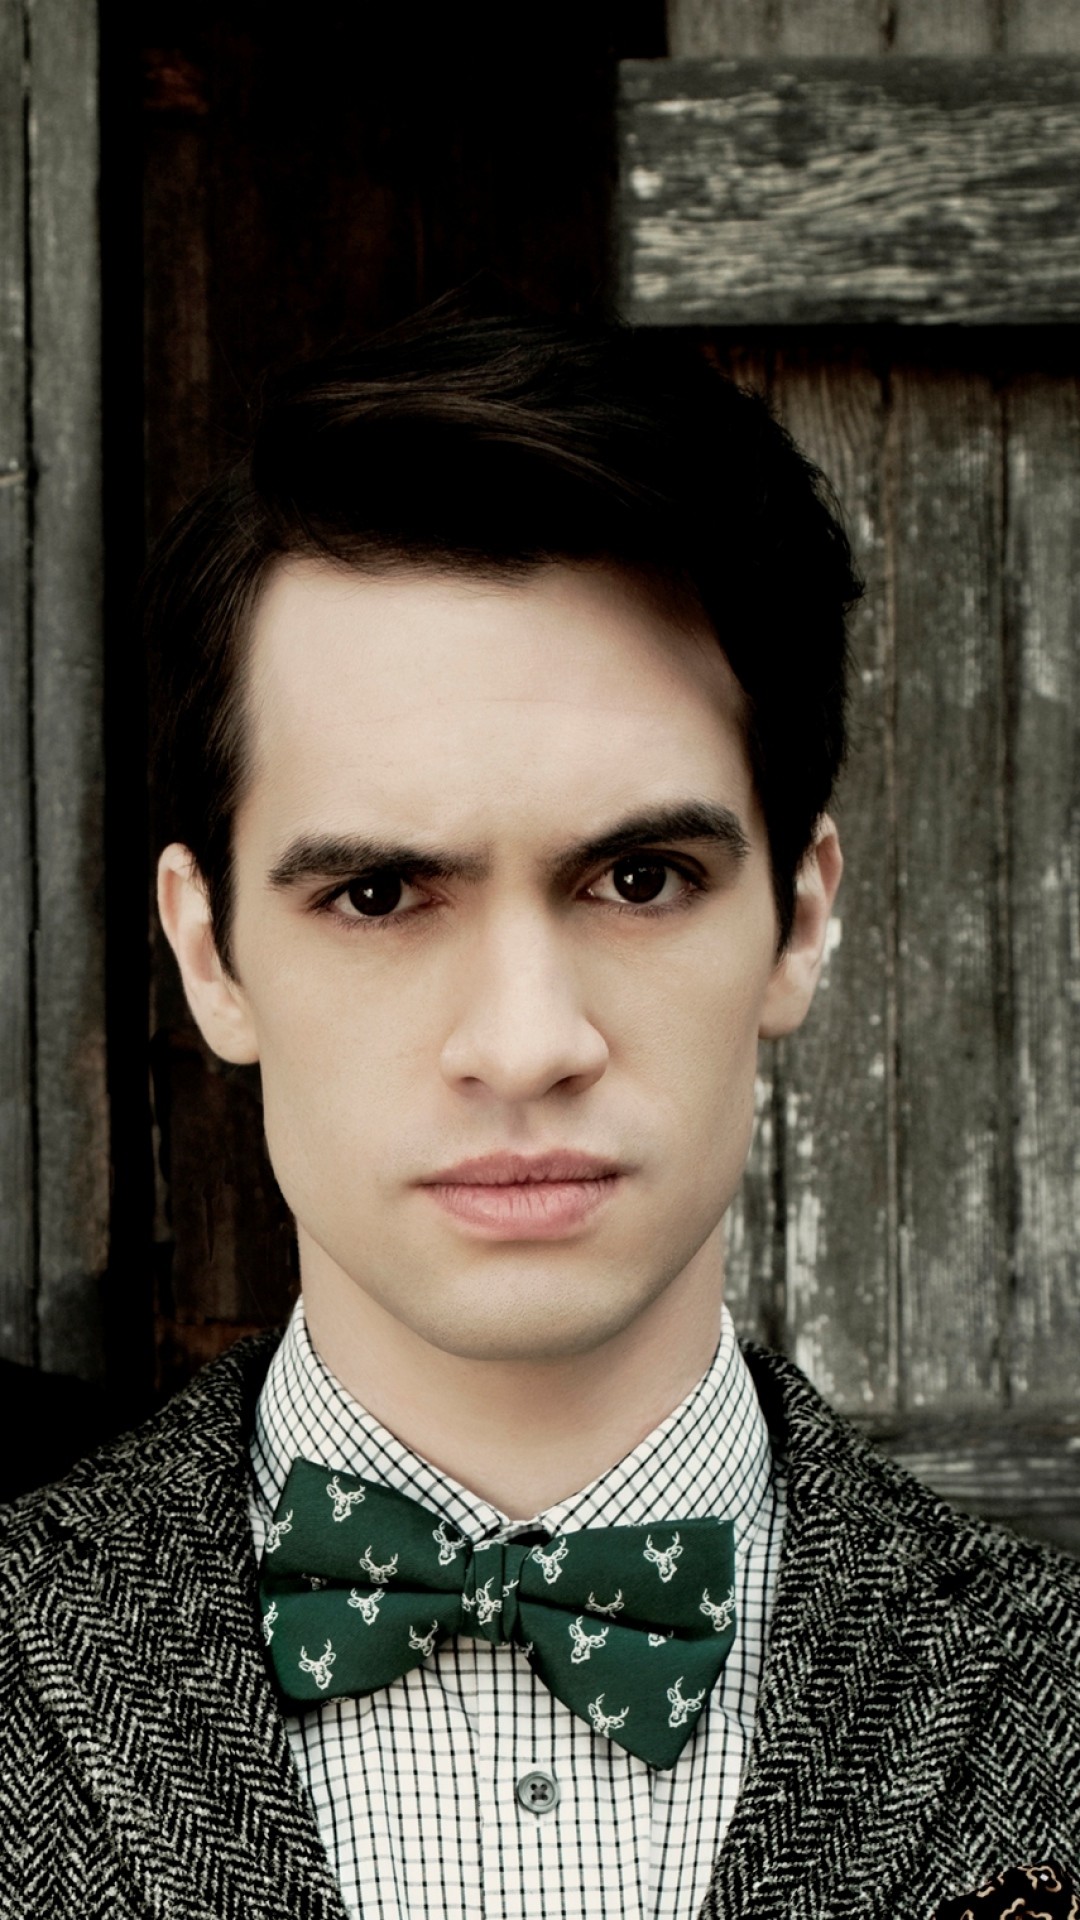 1080x1920  Wallpaper panic at the disco, brendon urie, spencer smith